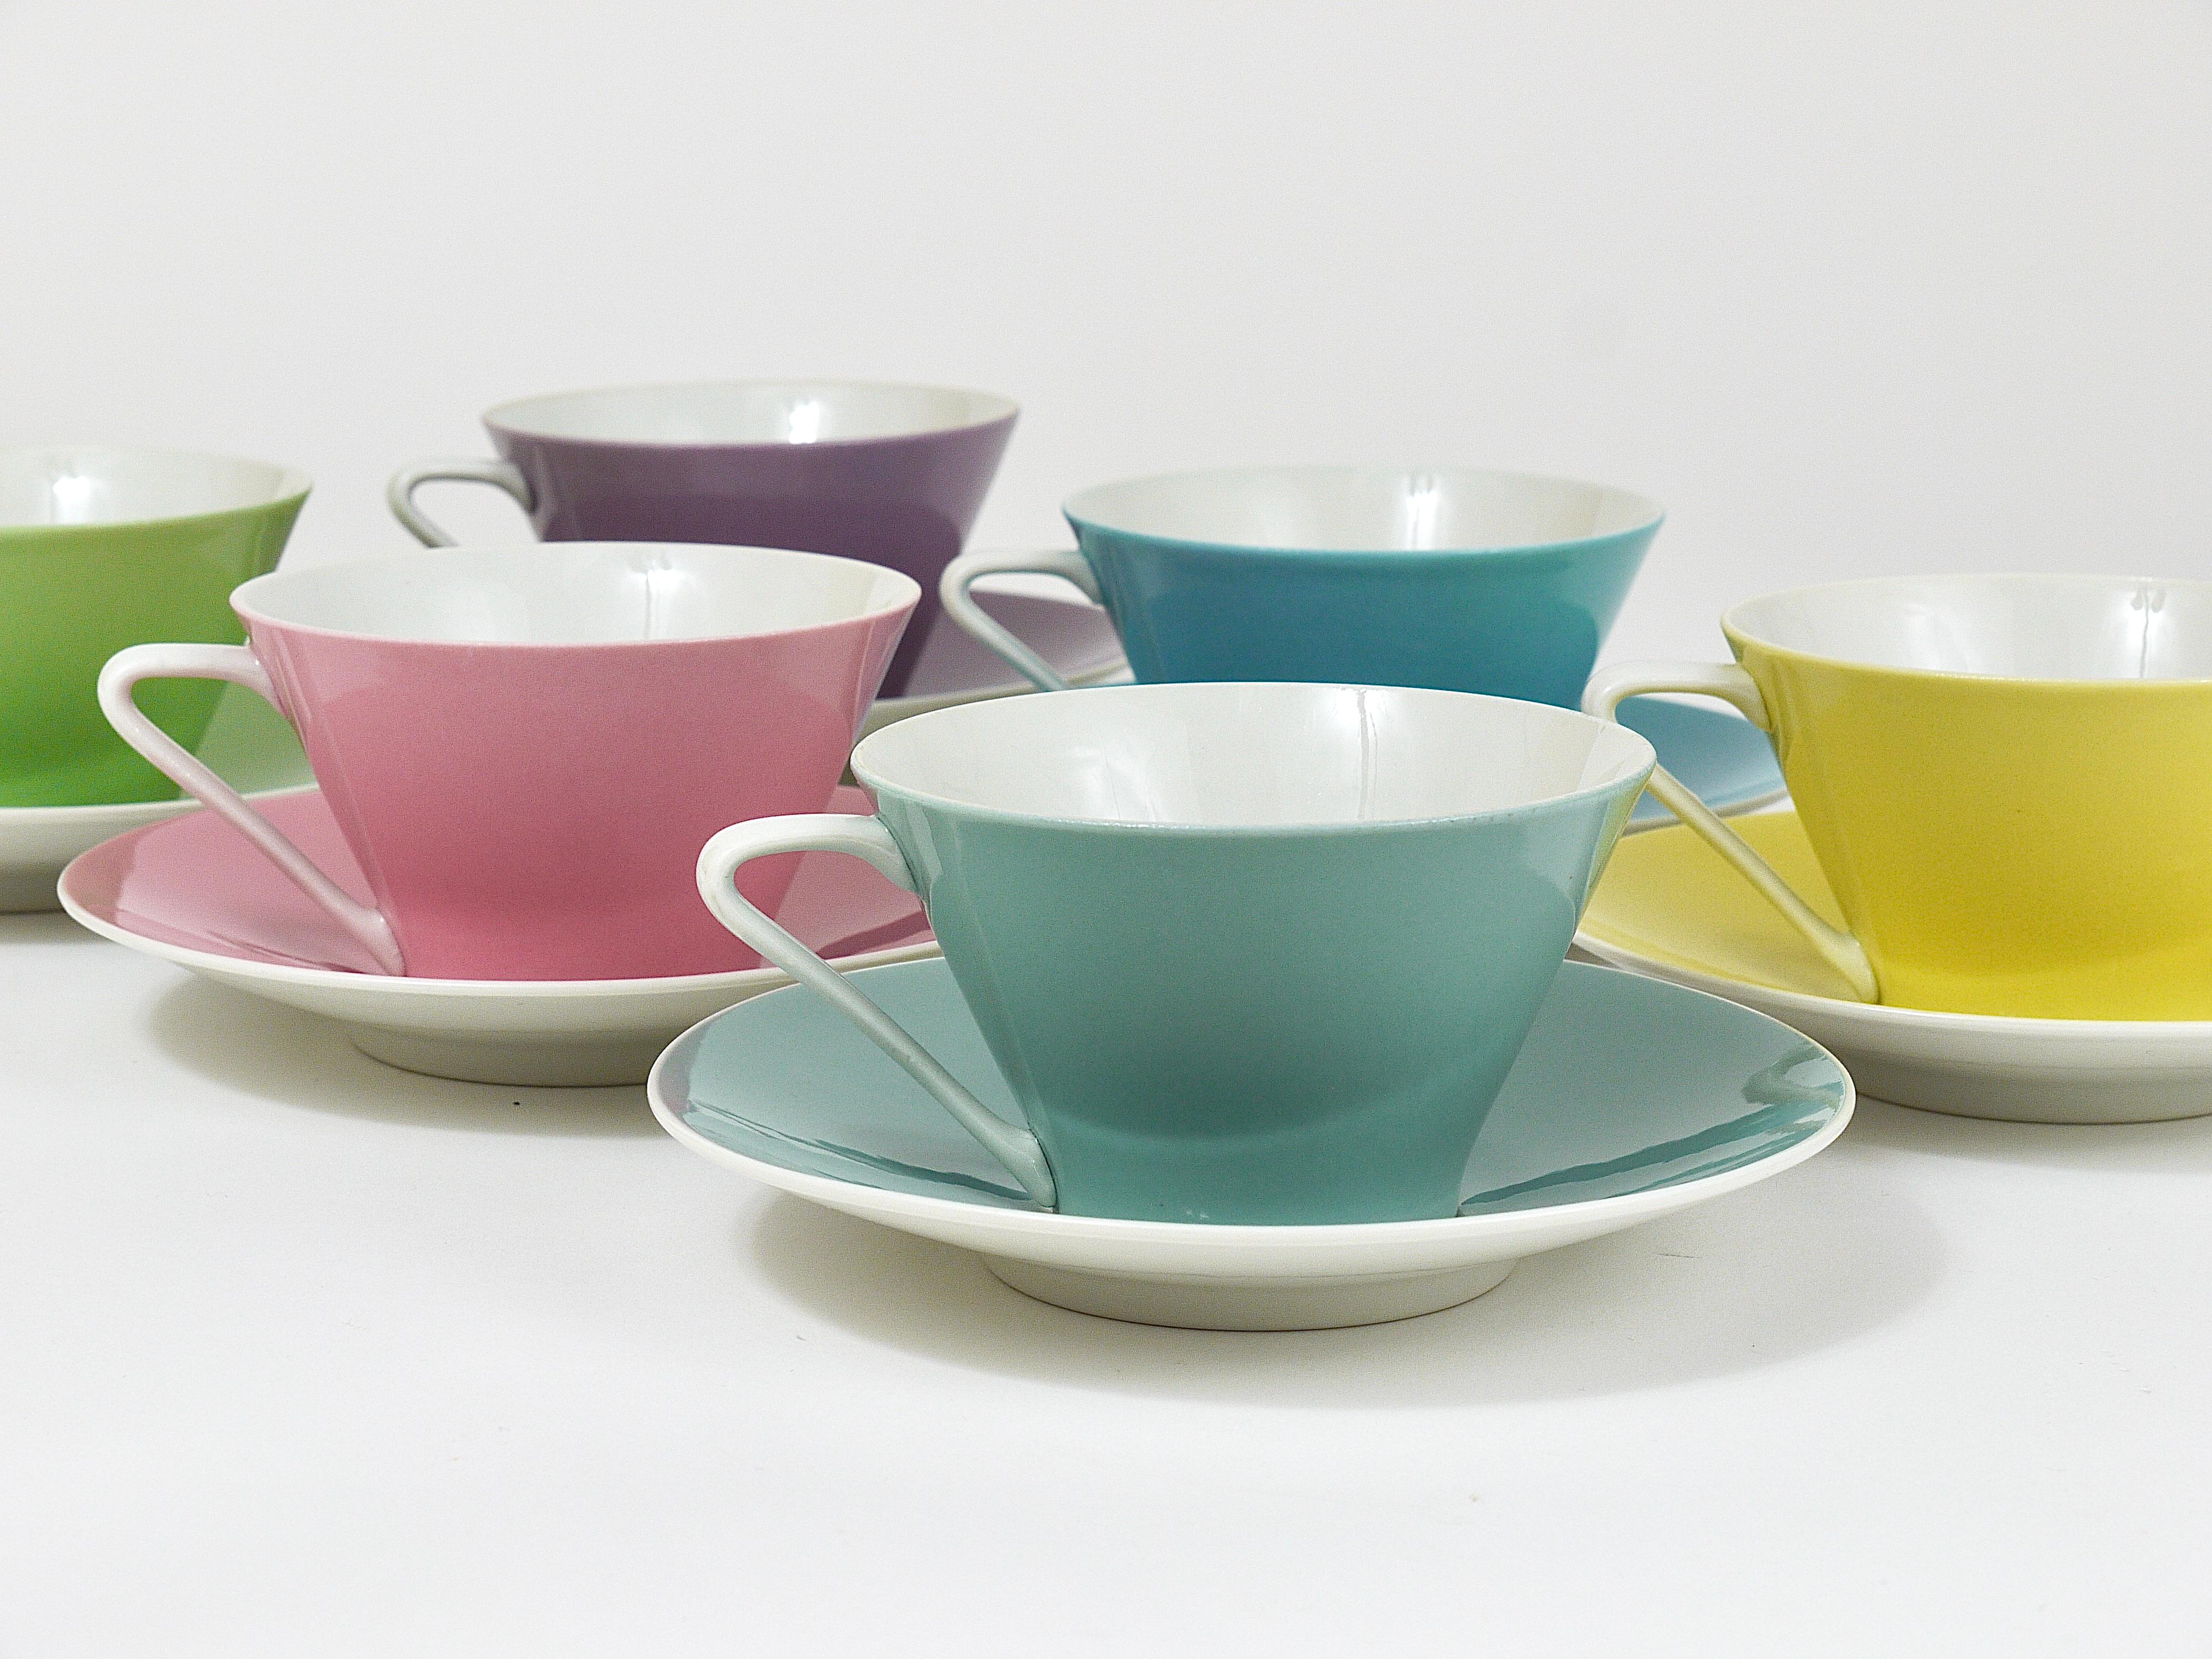 A set of six charming conical coffee cups and saucers from the „Daisy“-series, made of thin, fine china in six different lovely pastel colors, yellow, light blue, light green, bluegray, pink/rosé and lilac. Made in the 1950s by Lilien Porzellan